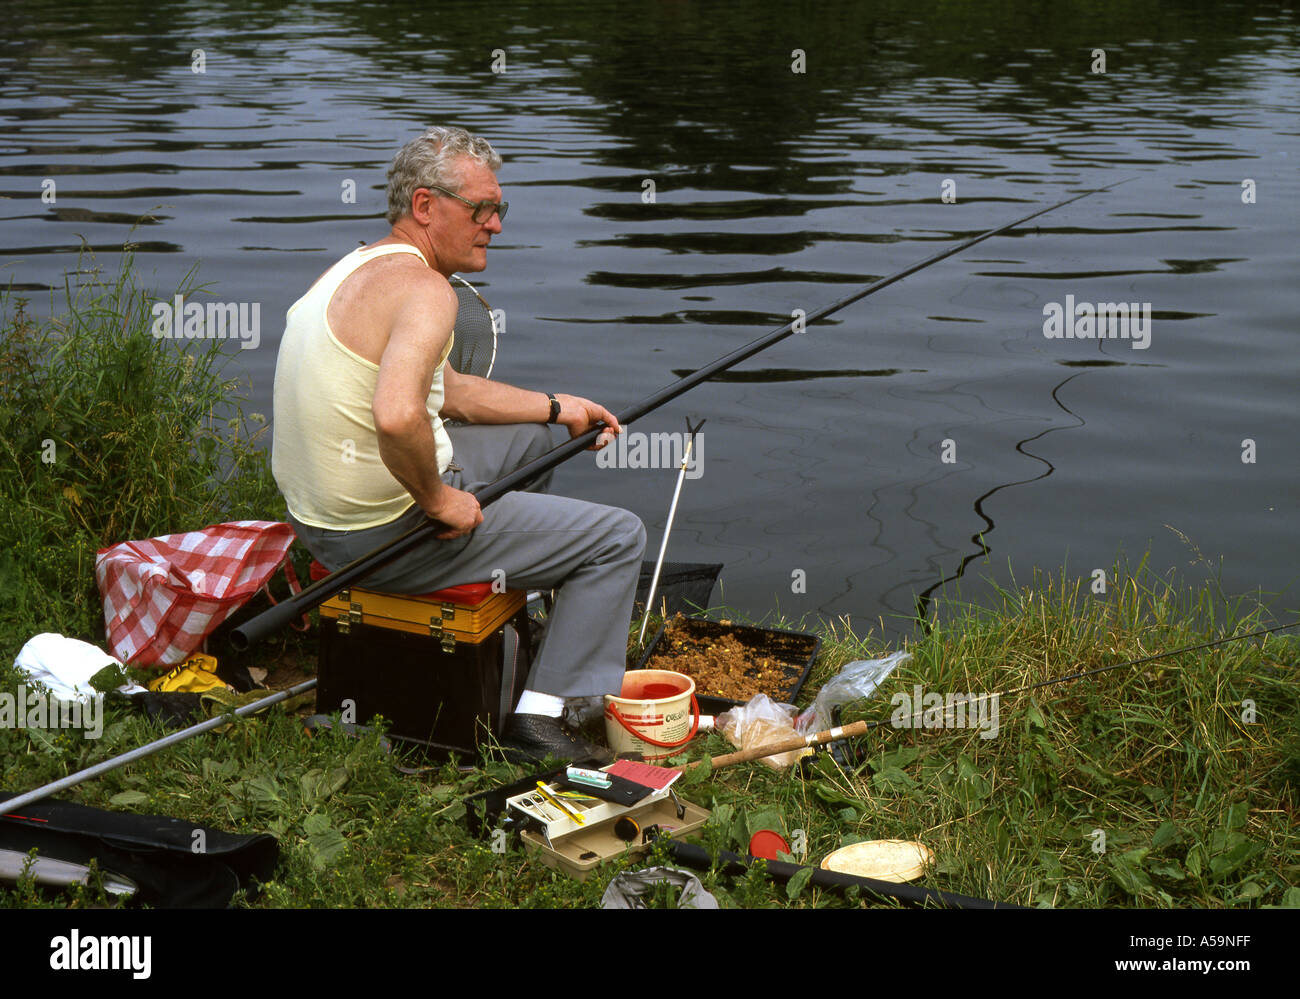 Man fishing on canal using a roach pole in warm weather Stock Photo - Alamy